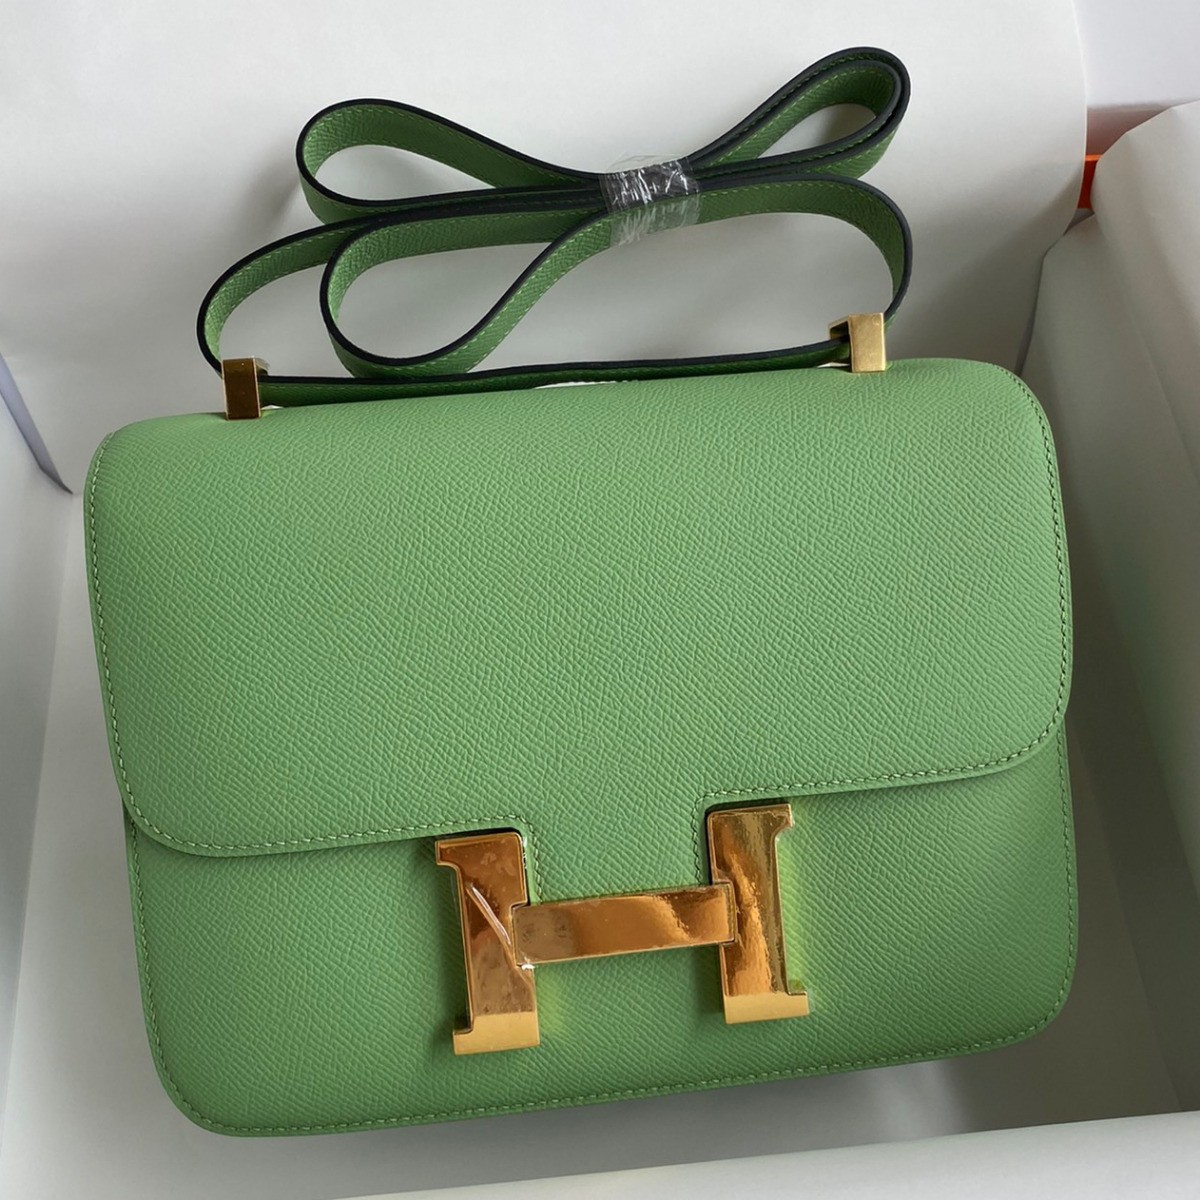 🌱 Dreamy Constance 24 in Vert Criquet Epsom leather, GHW